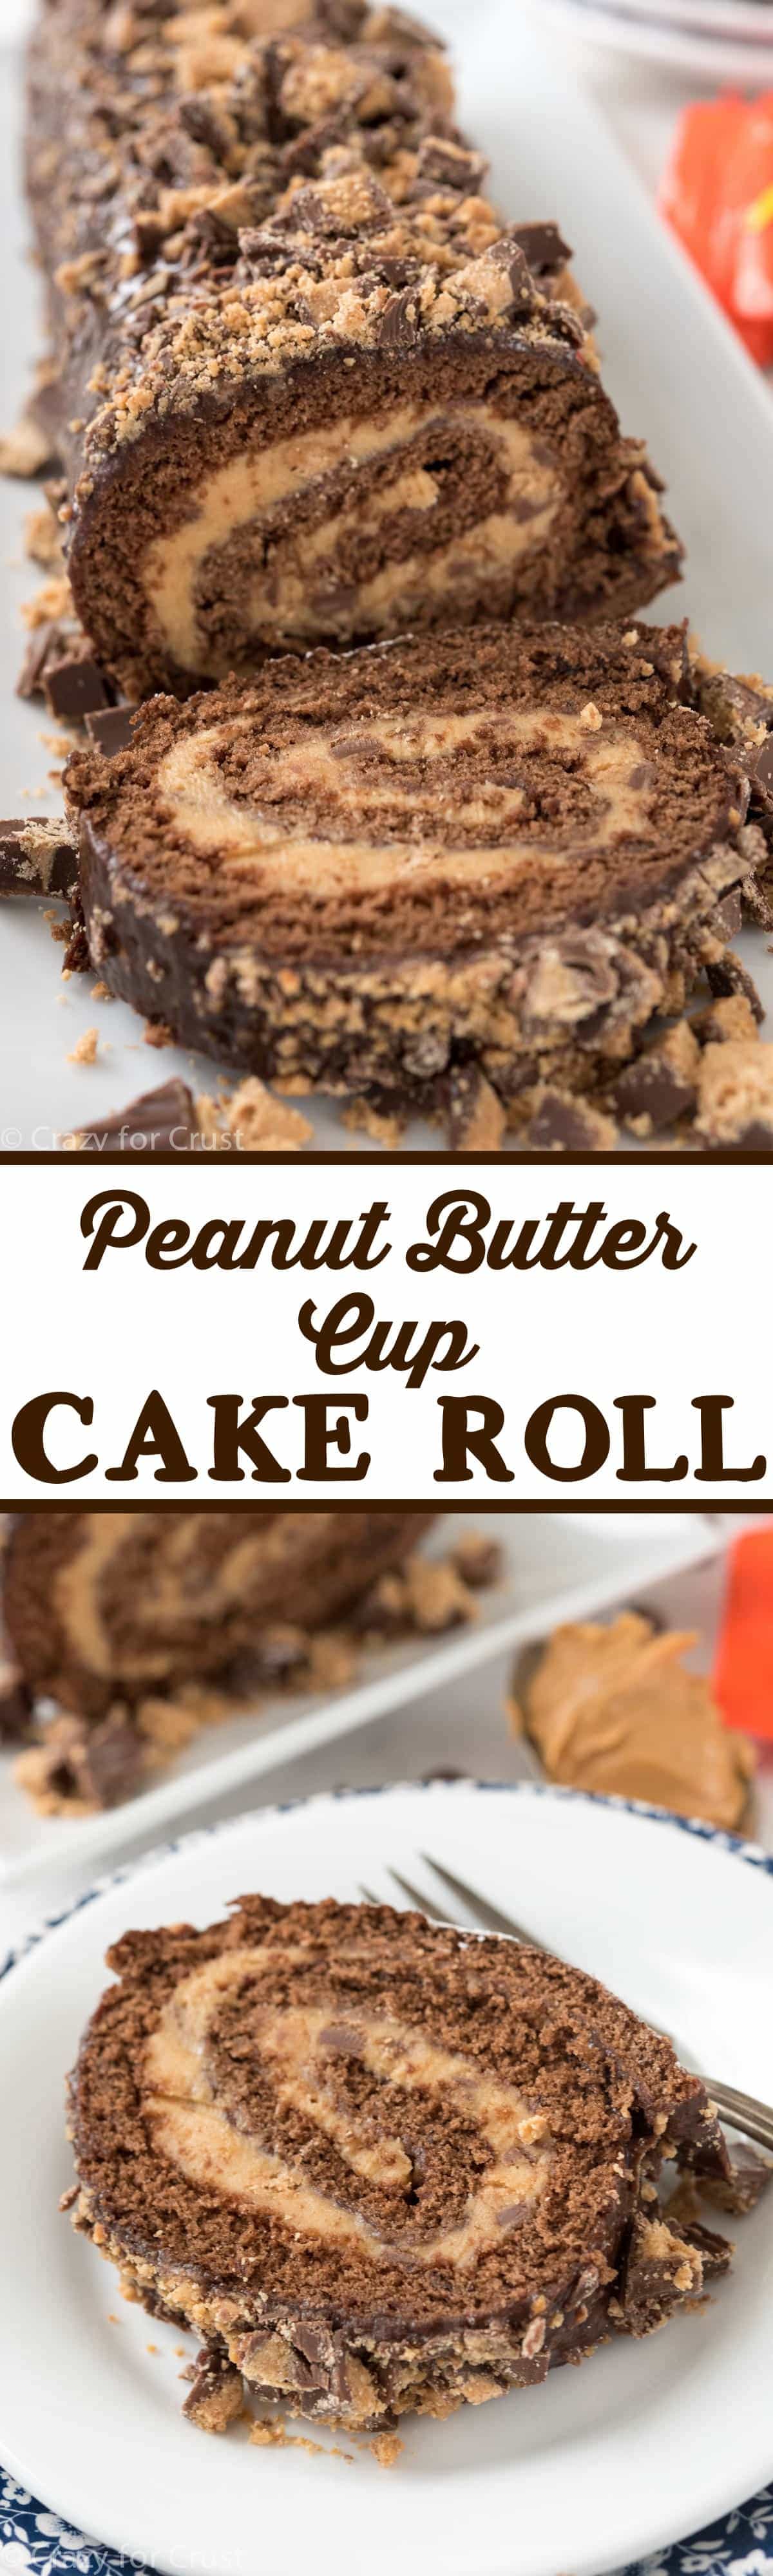 Peanut Butter Cup Cake Roll - it's an elegant dessert that is actually an easy recipe to make! Chocolate cake filled with peanut butter cup filling - the perfect dessert!